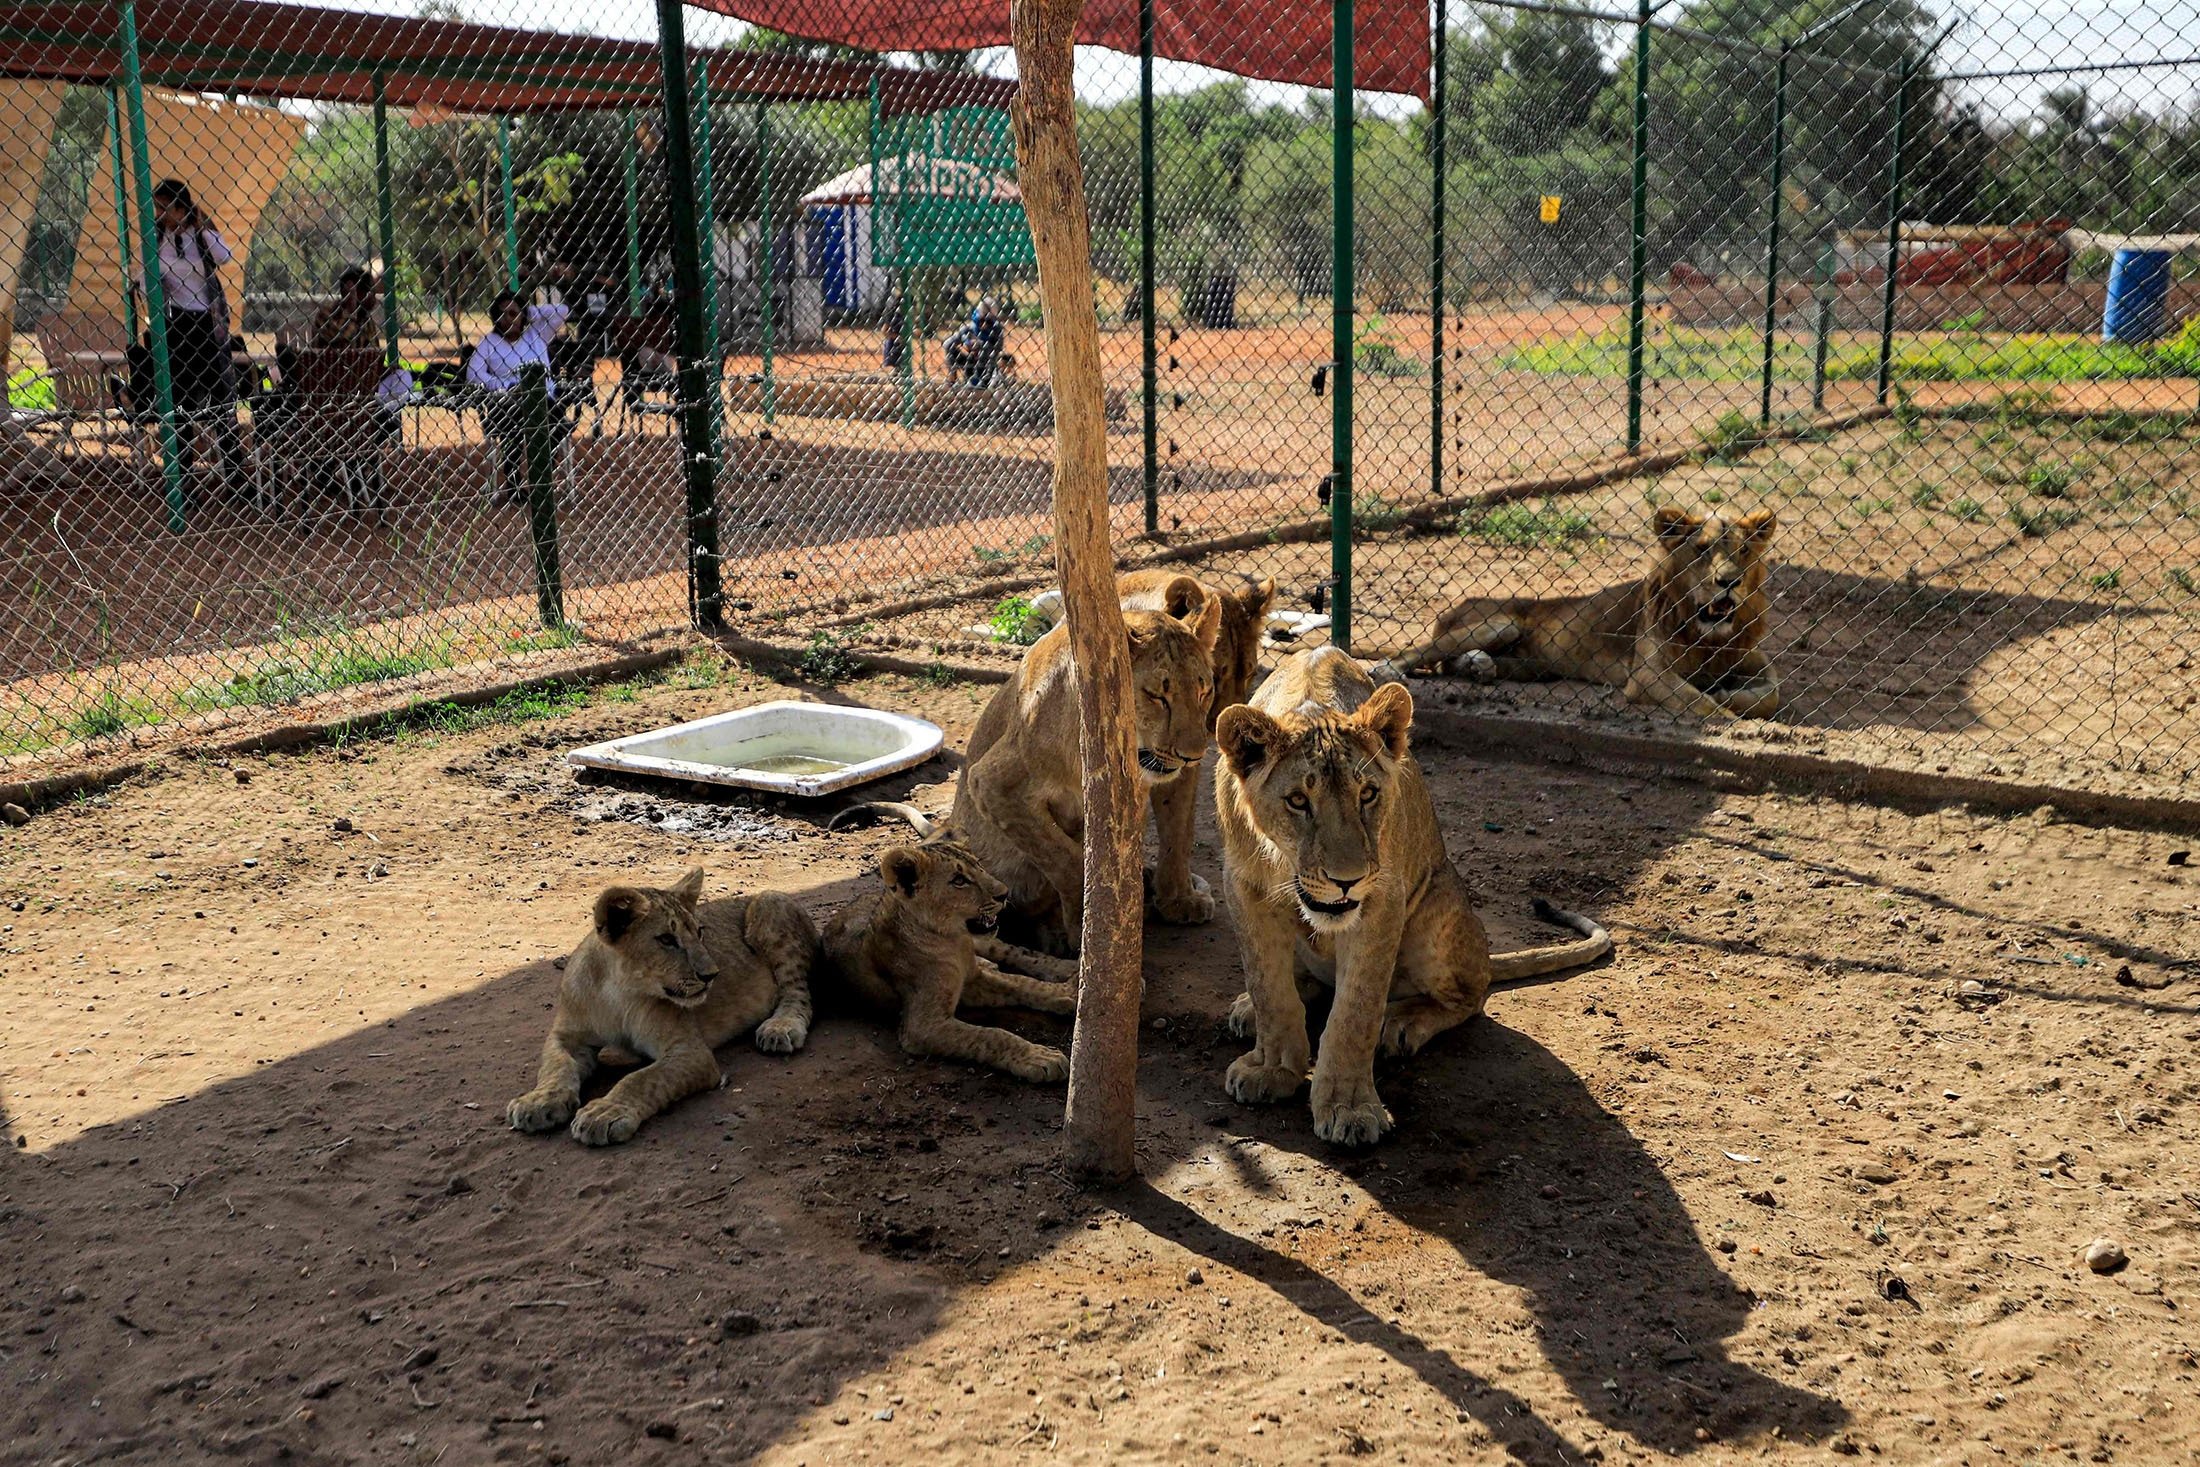 A lioness and cubs sit in an enclosure at the Sudan Animal Rescue center in al-Bageir, south of the capital Khartoum, Sudan, Feb.  28, 2022. (AFP Photo)